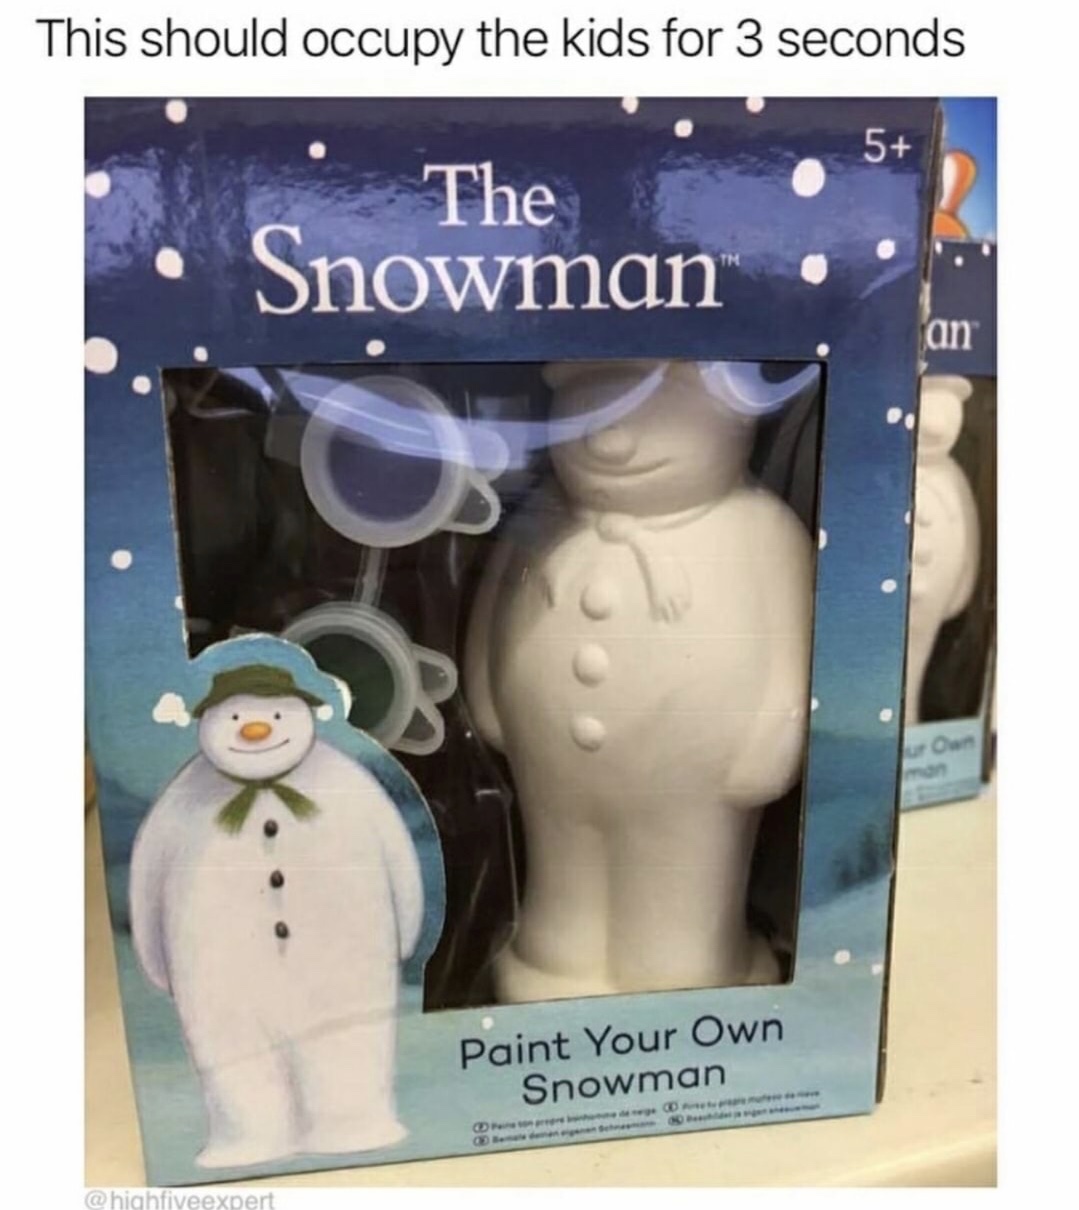 figurine - This should occupy the kids for 3 seconds 5 The Snowman" Paint Your Own Snowman